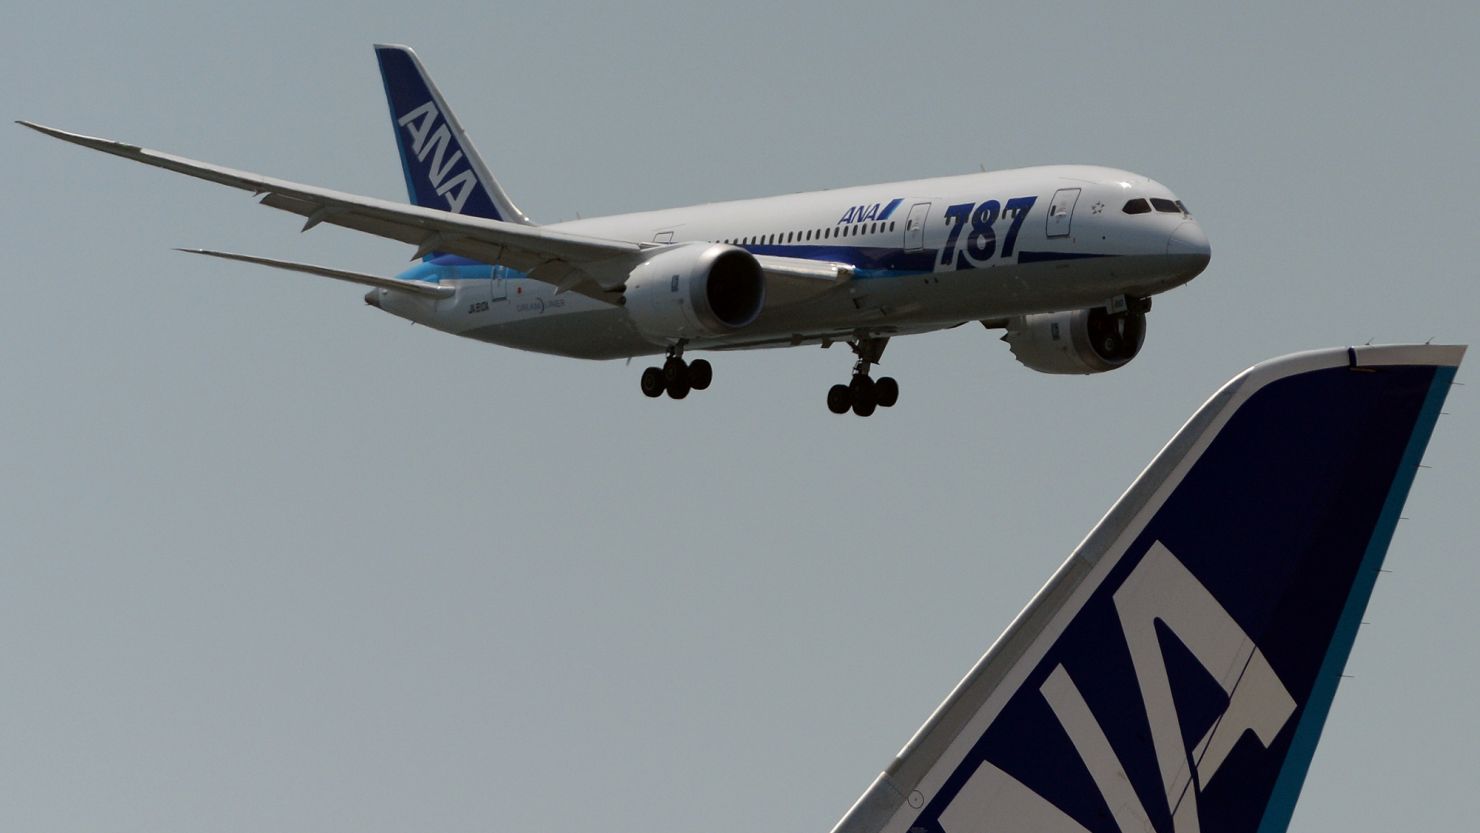 The first Dreamliner test flight in Japan was on Sunday.